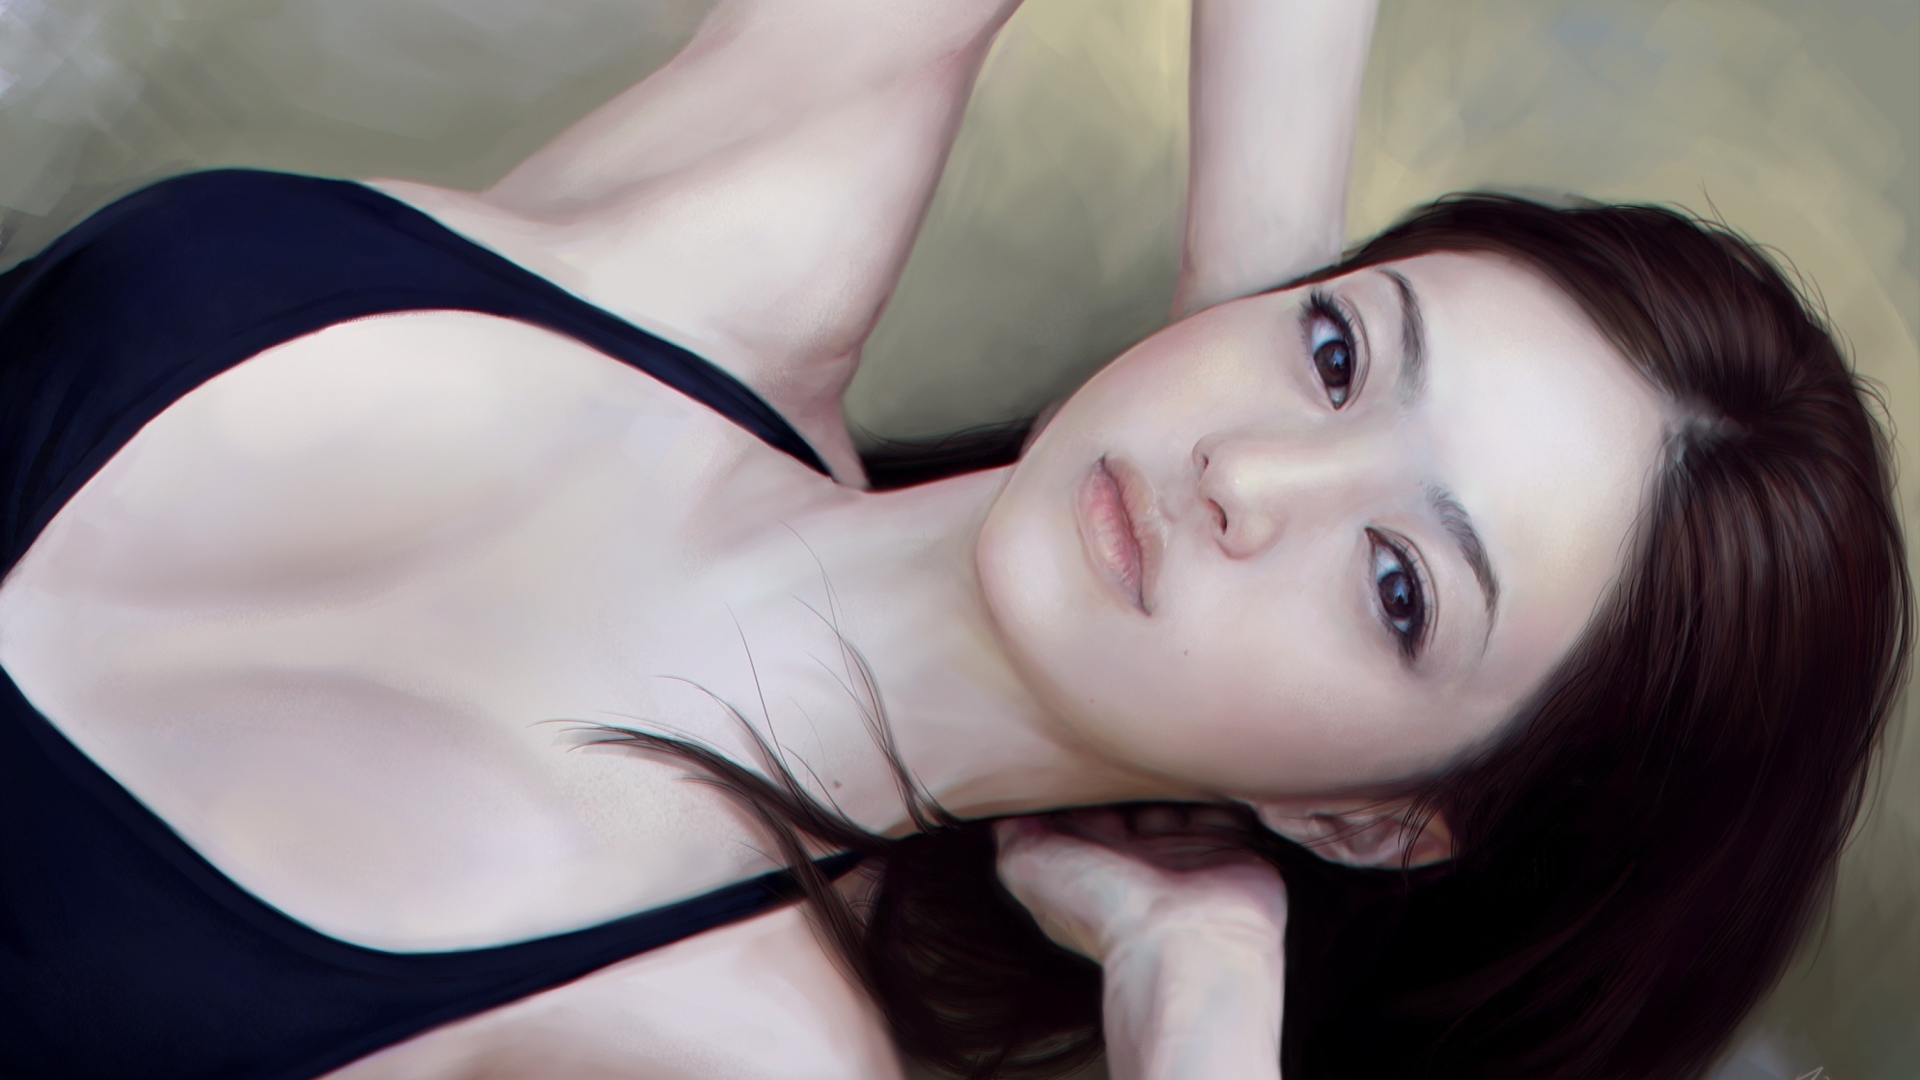 Girl's Face Realistic Painting wallpaper 1920x1080